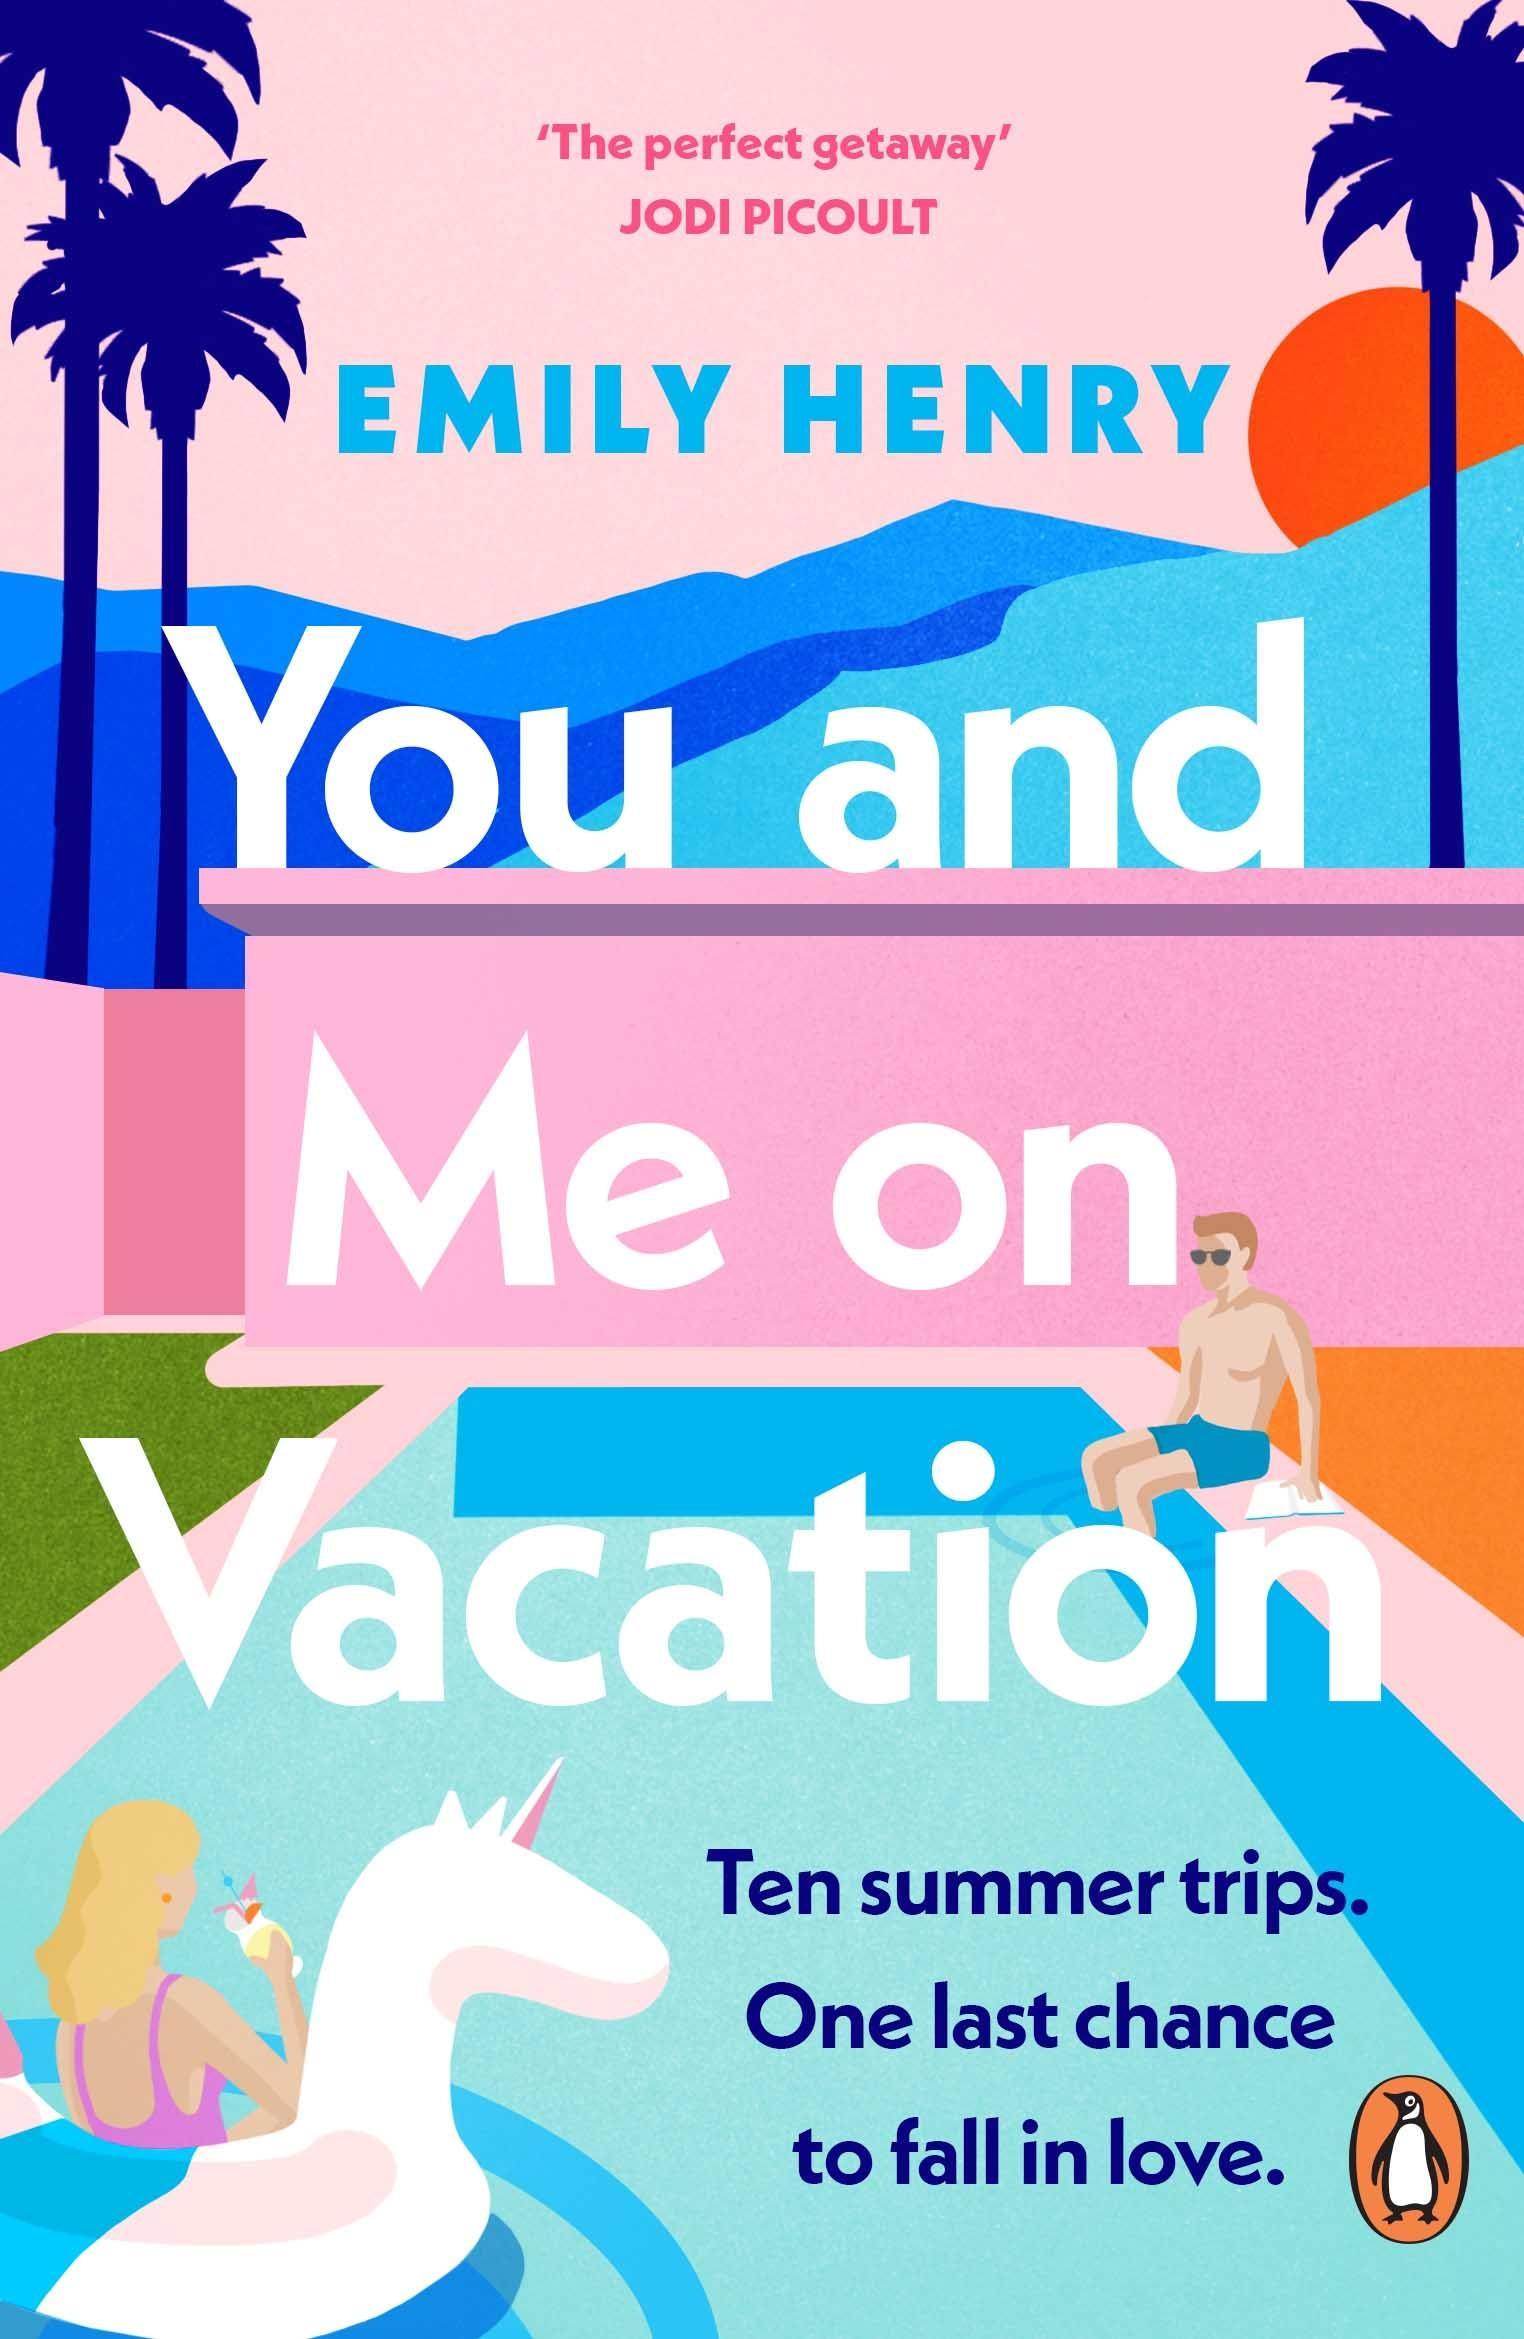 You and Me on Vacation by Emily Henry